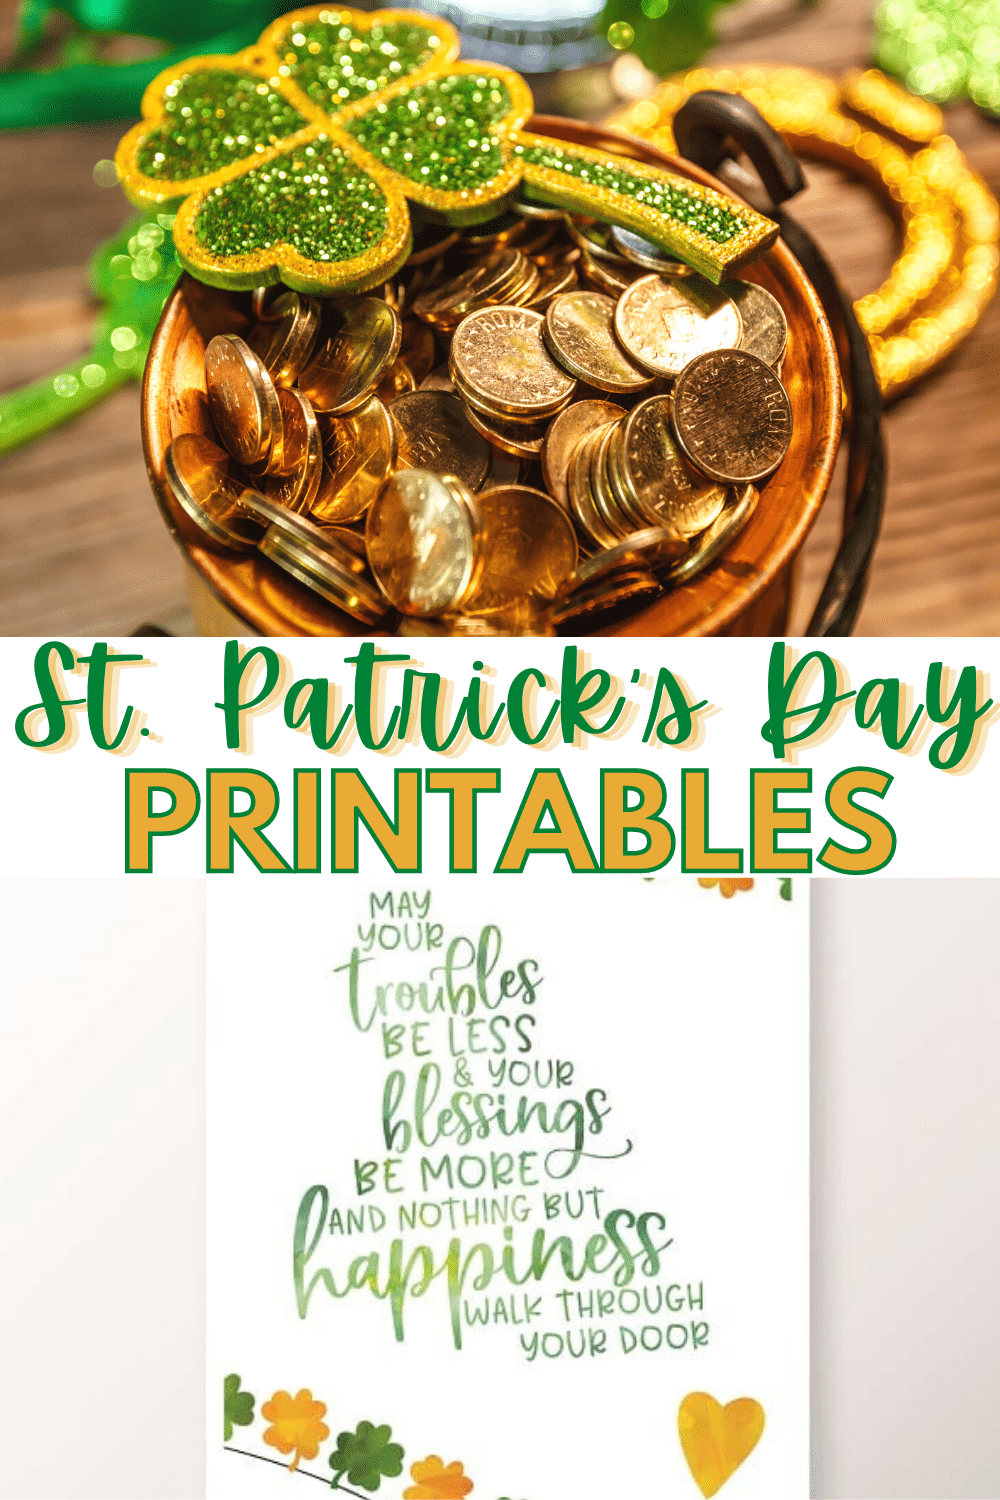 Two cheerful and festive St Patrick's Day printables. Such an easy and inexpensive way to add some Irish cheer to your home for St. Patrick's Day! #StPatricksDay #printables via @wondermomwannab